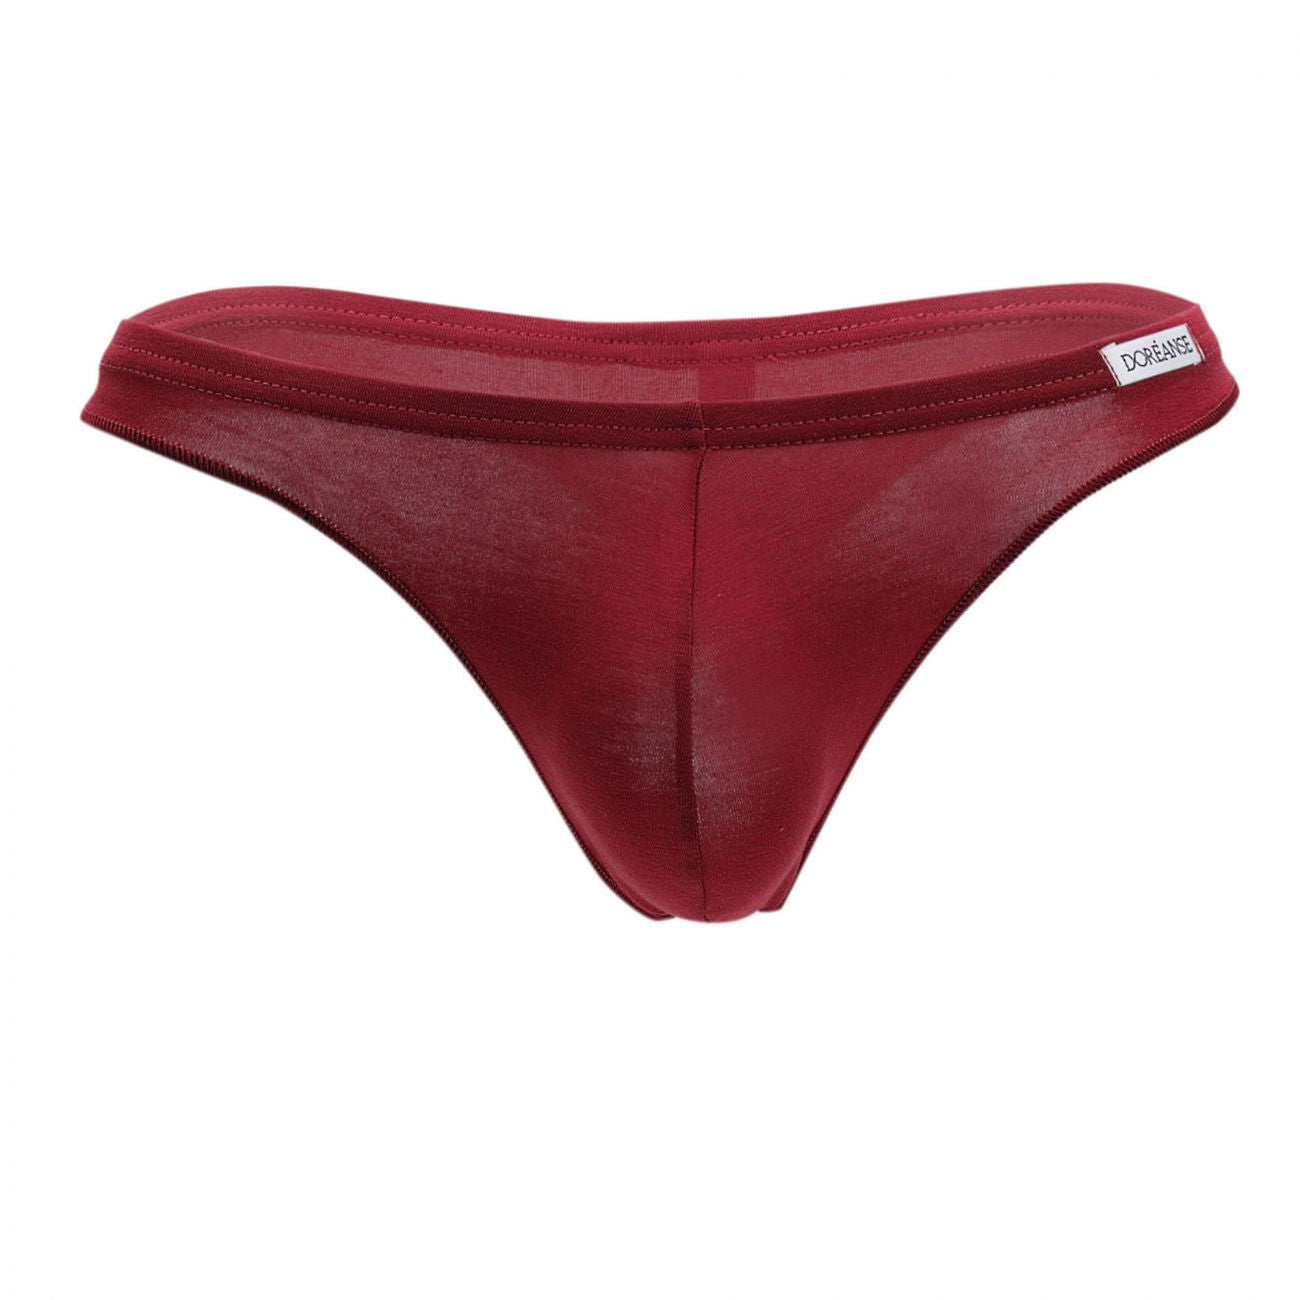 Doreanse Euro Thong – UnderYours